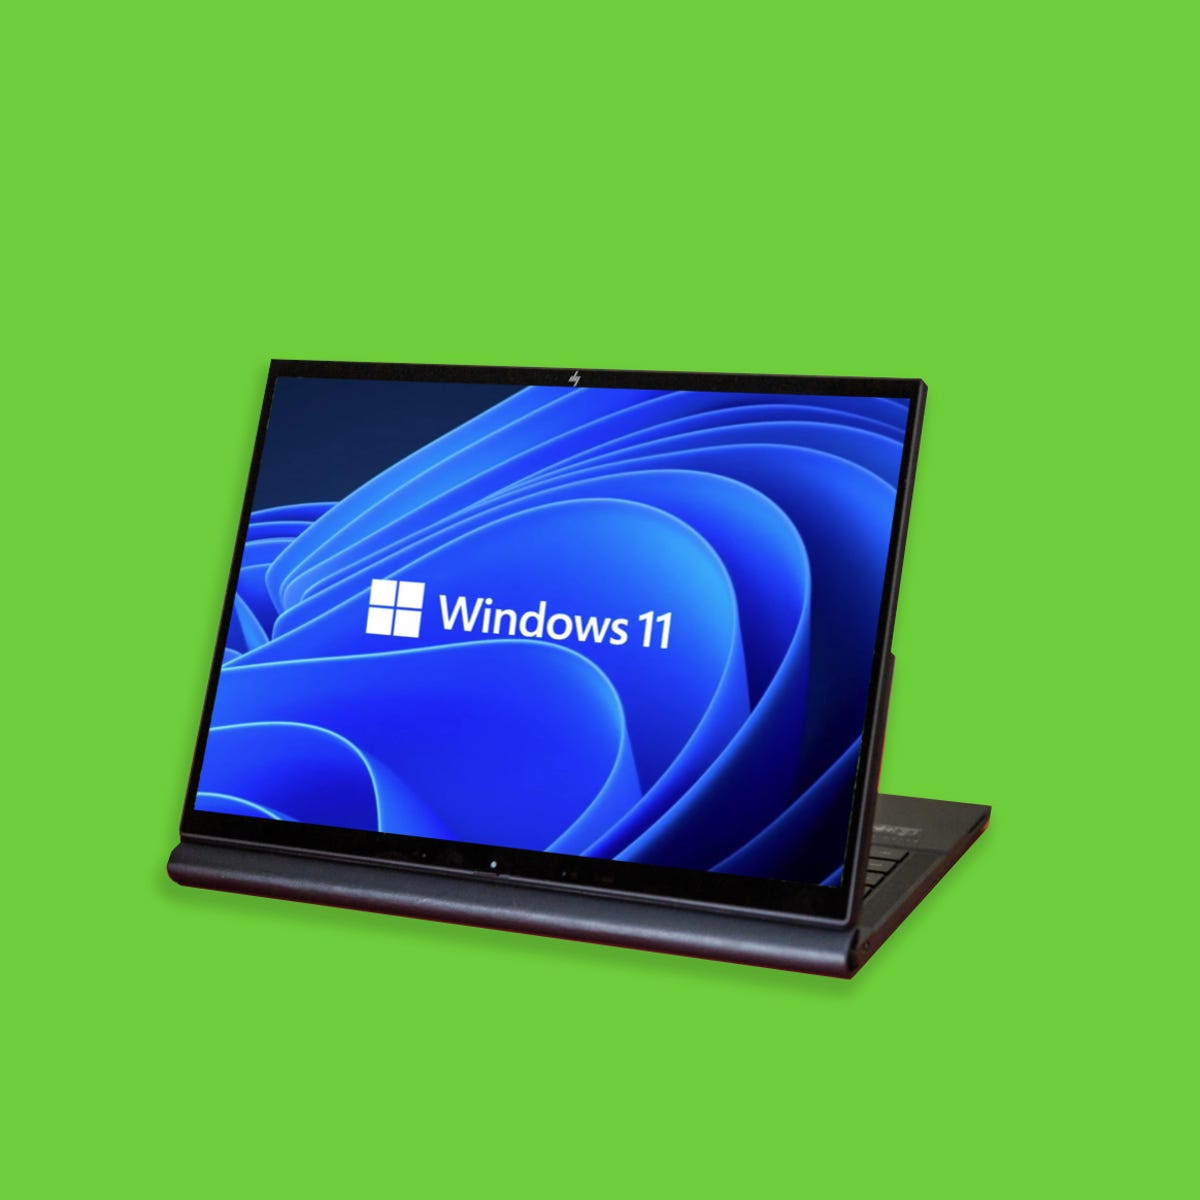 Windows 11's 2022 Update: We Love These Upgraded Features - CNET